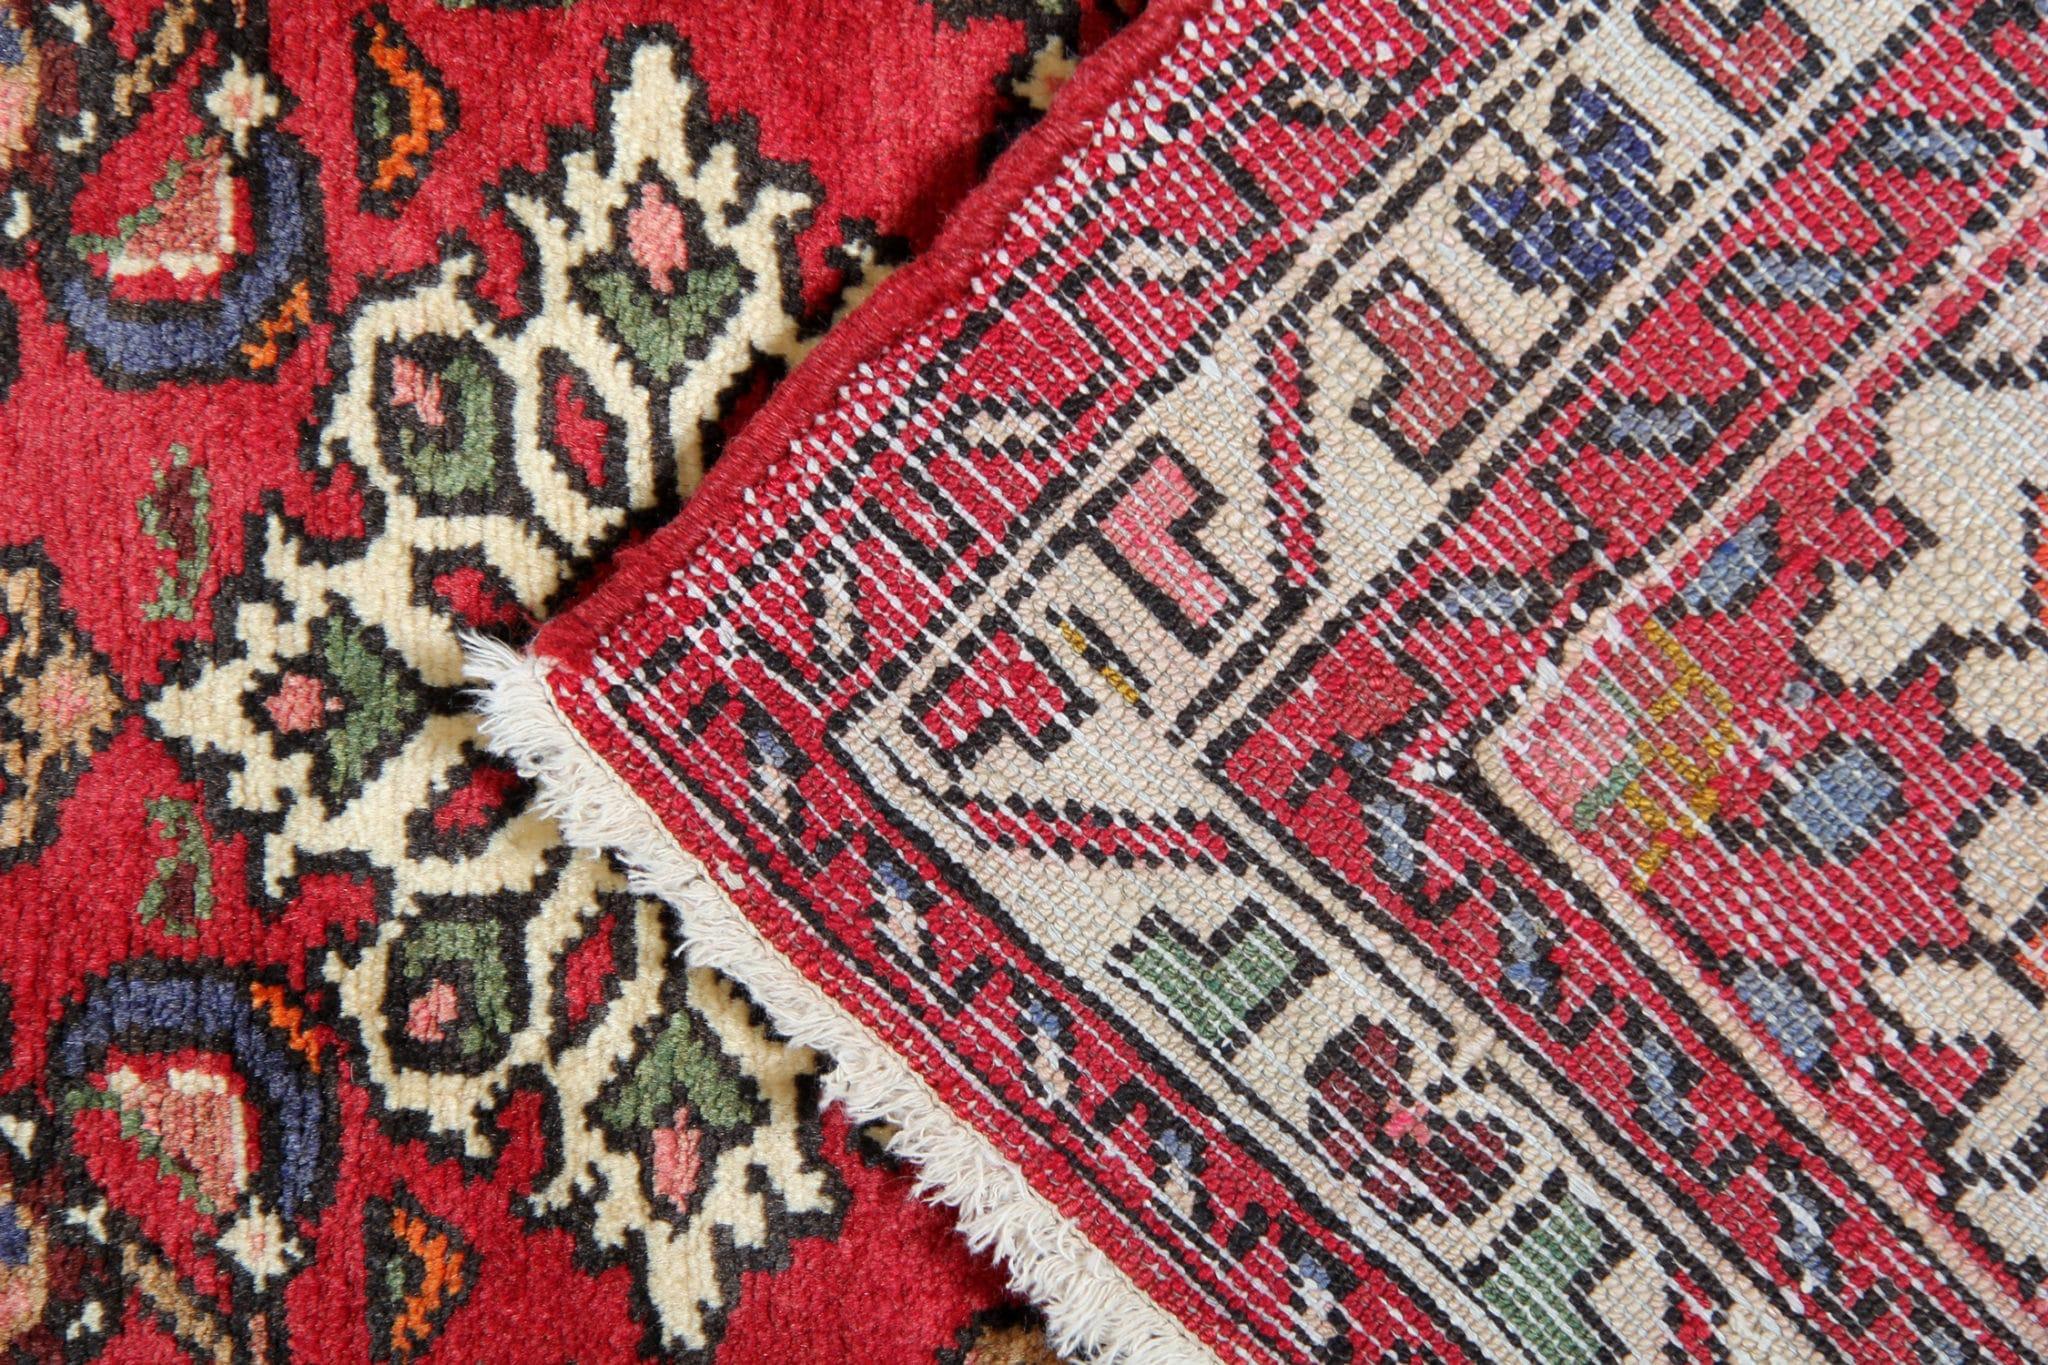 An exquisite vintage runner rug handcrafted with care and precision. This rug epitomizes the artistry and craftsmanship of oriental rug making, showcasing the rich heritage of the region. These carpets are made of all organic material including hand